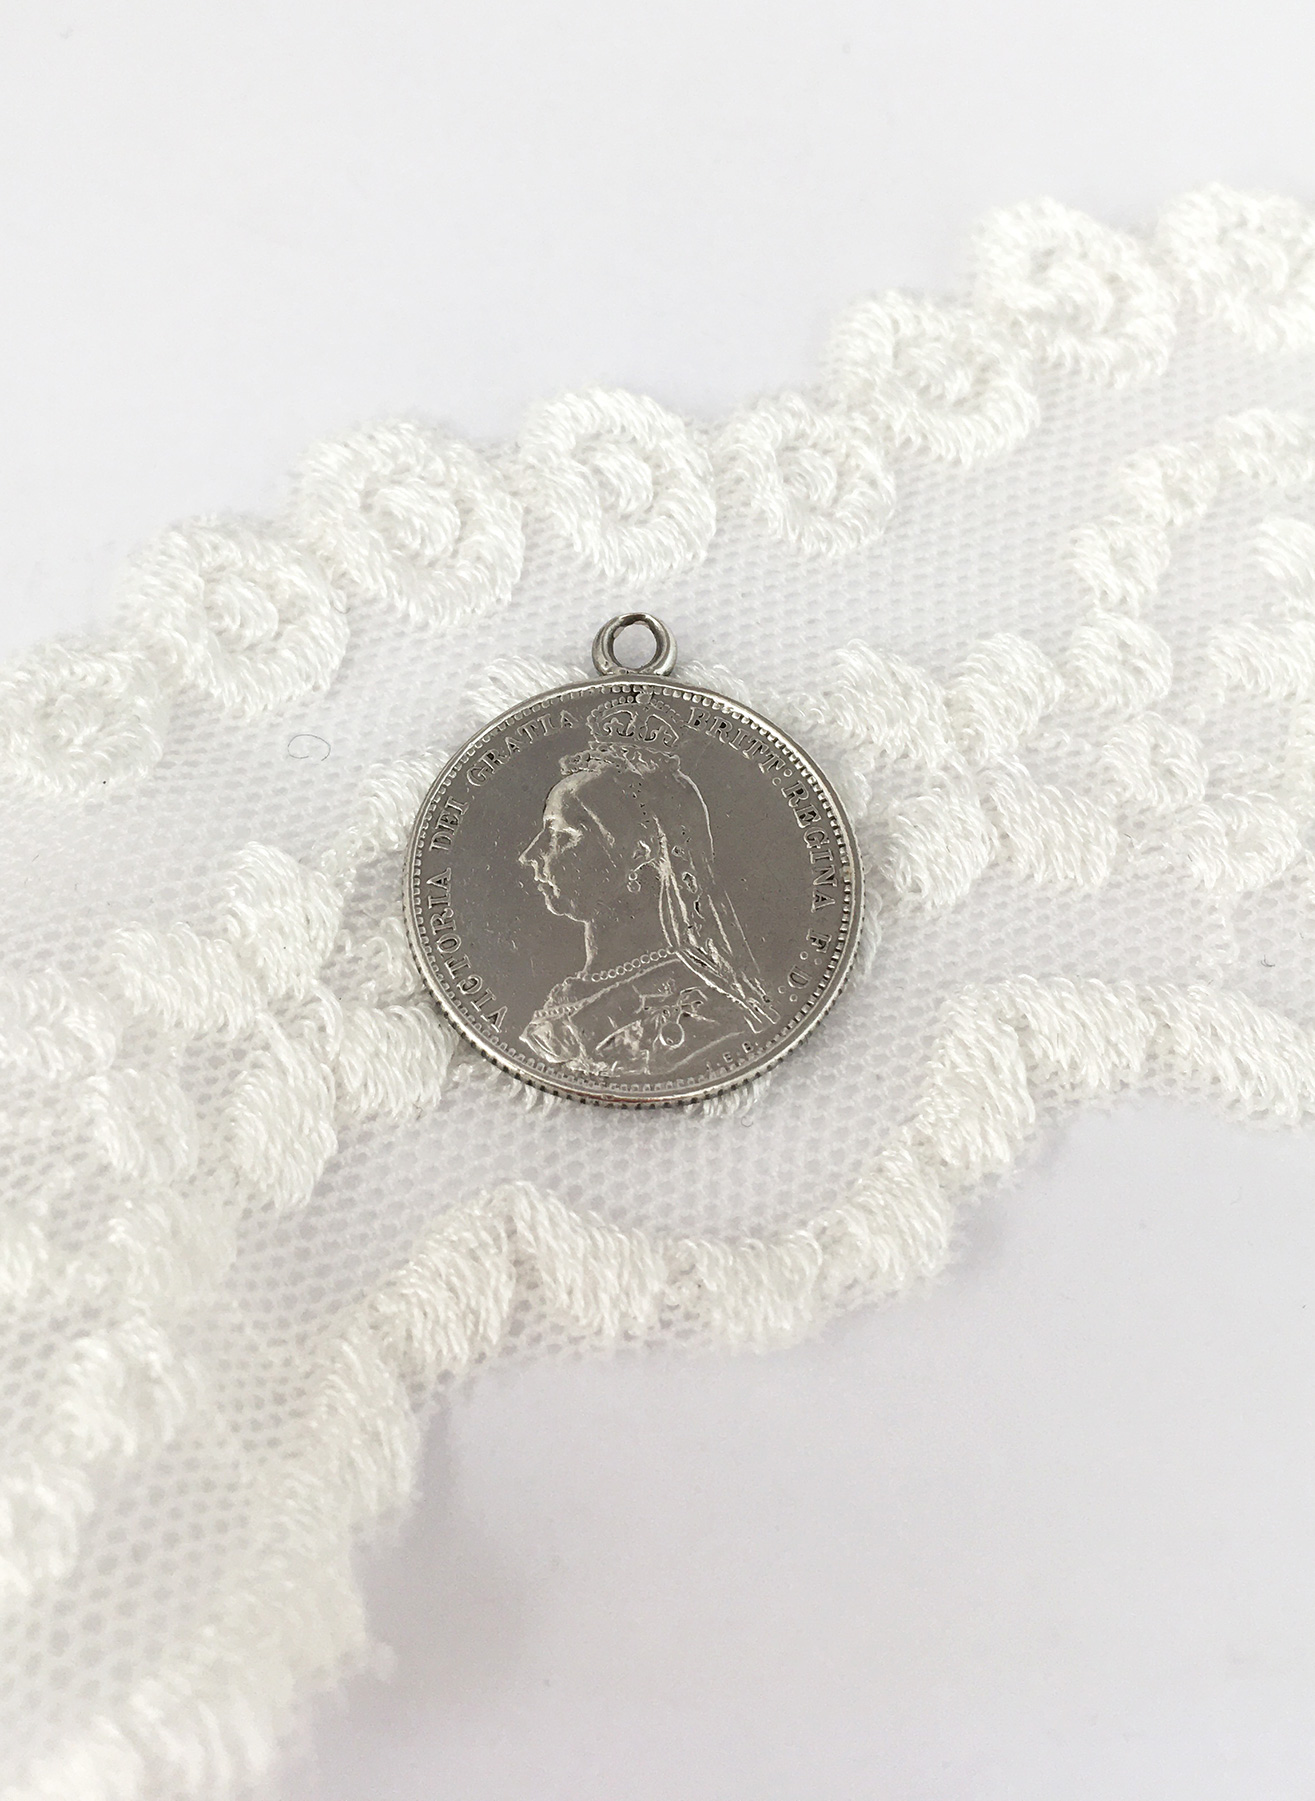 Sterling silver threepence coin, lucky something old